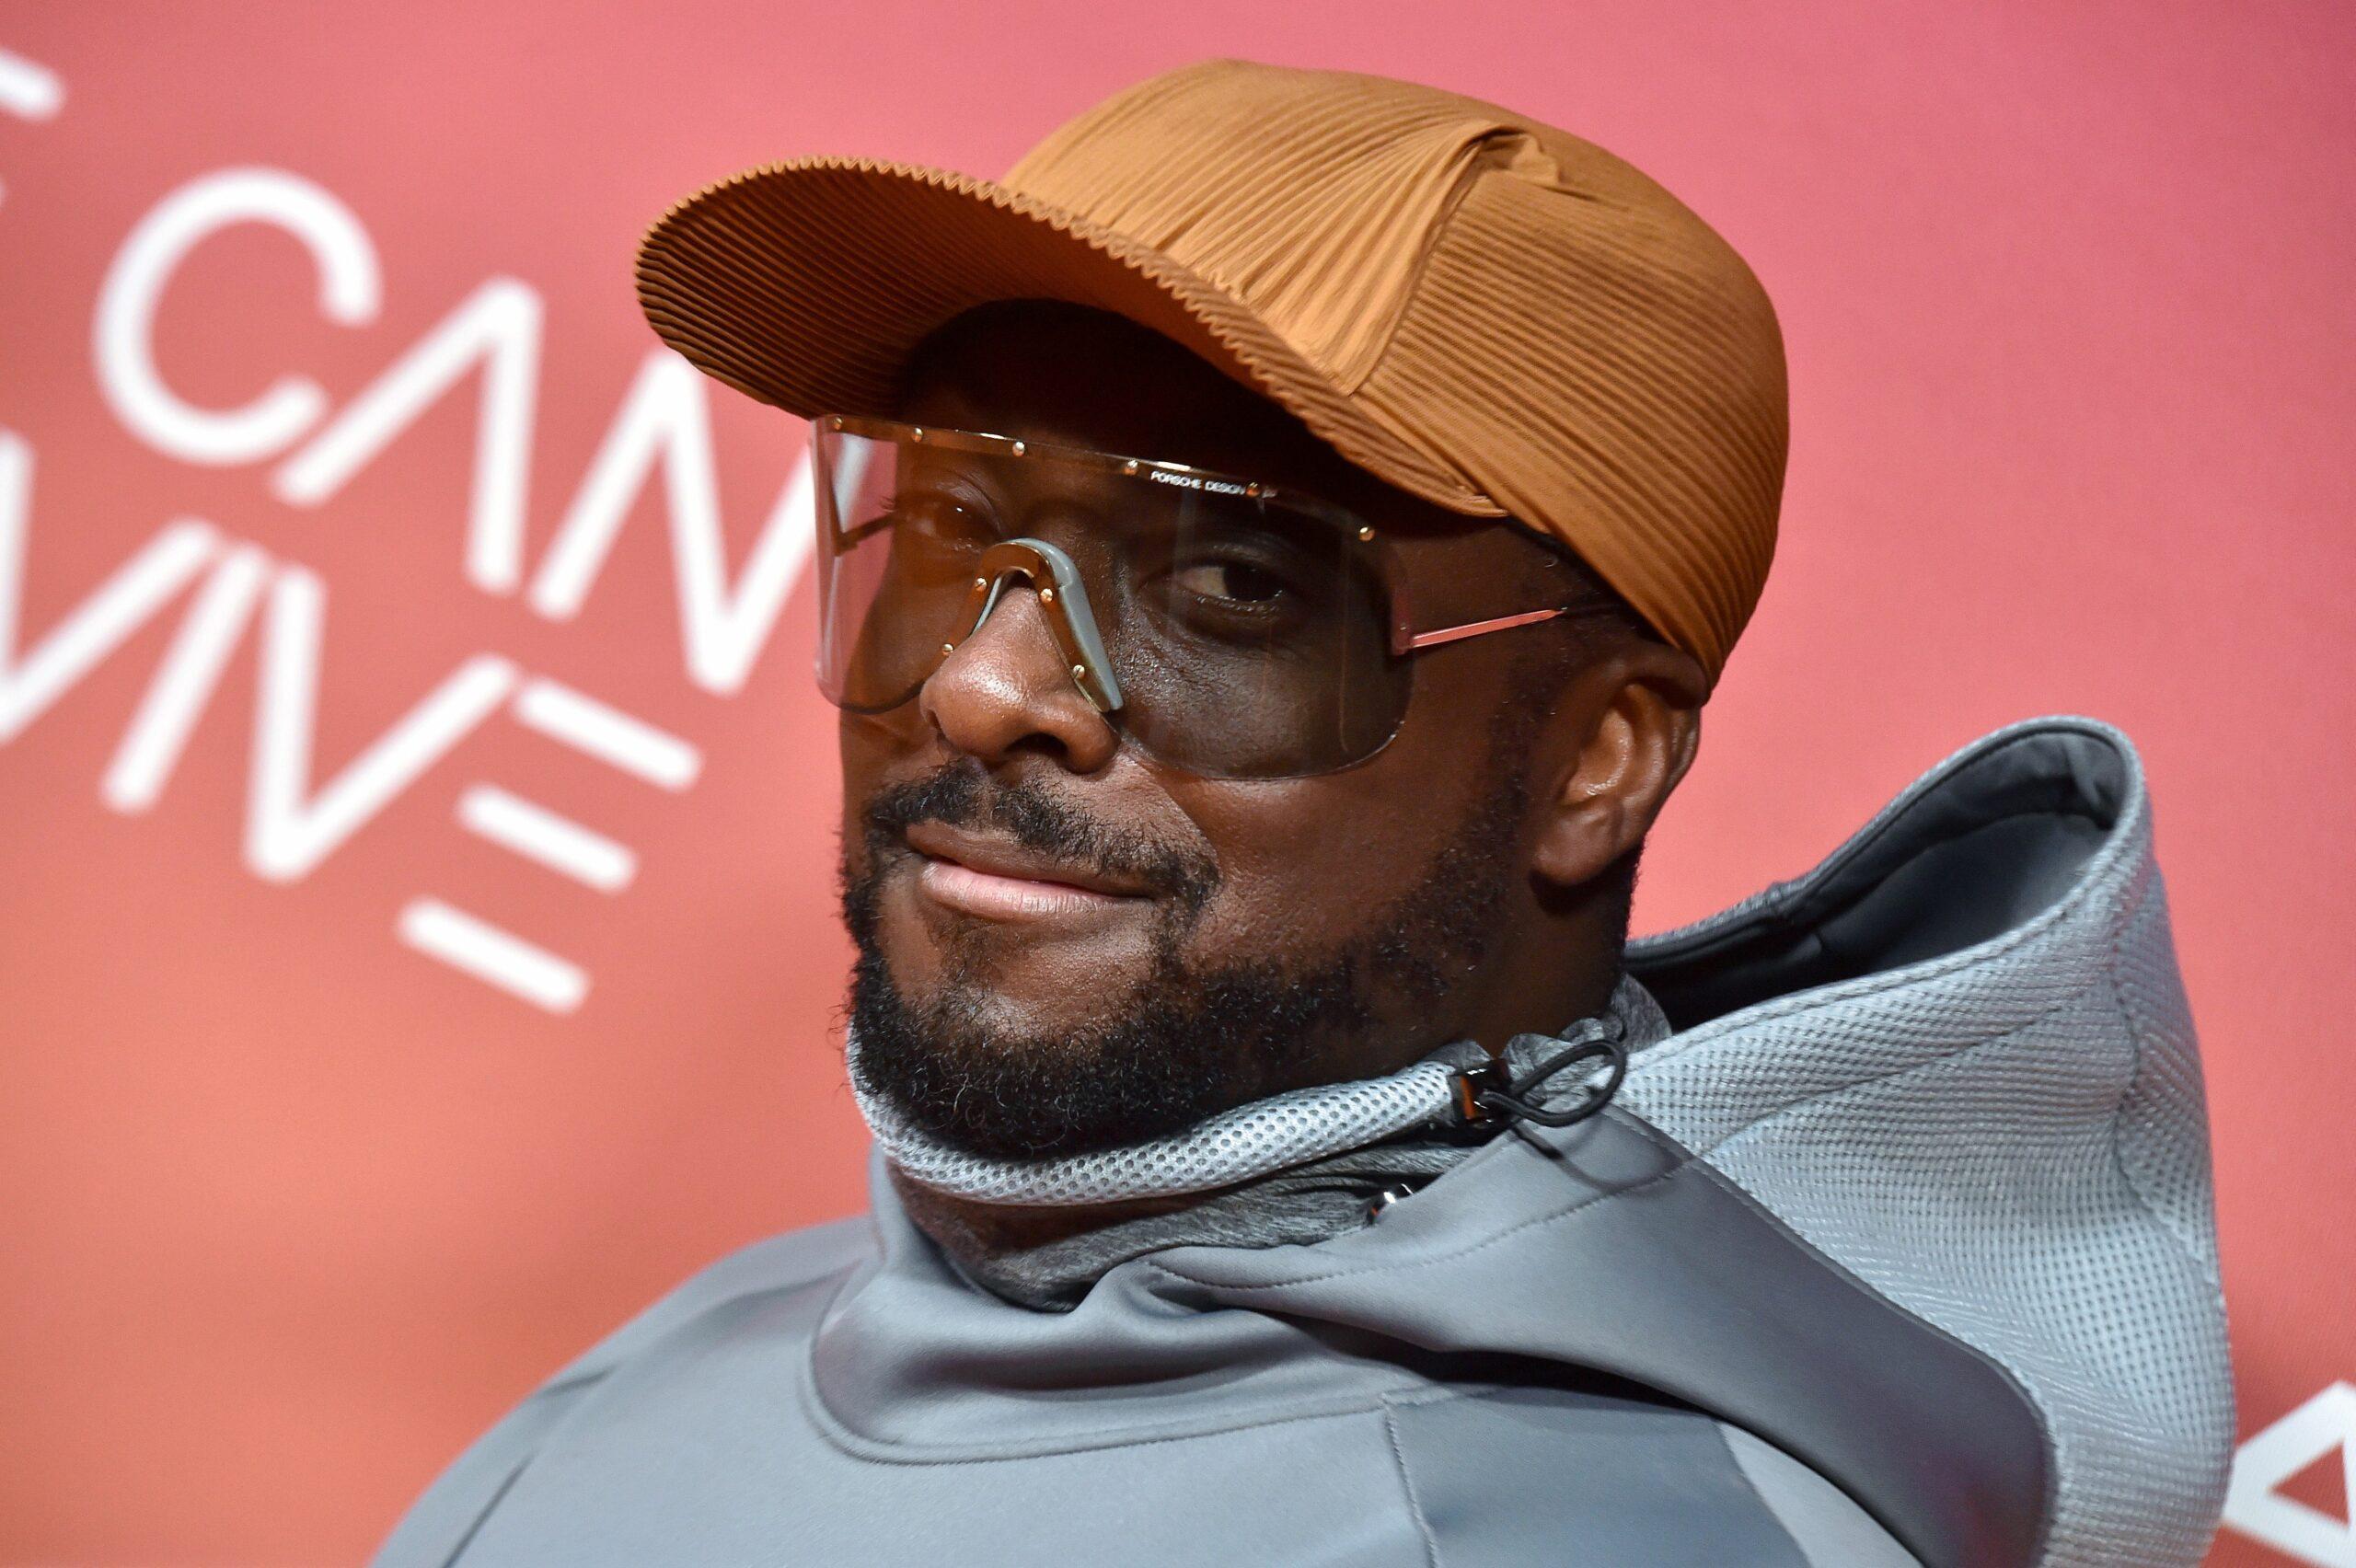 Audacy Hosts 8th Annual "We Can Survive" Concert. Hollywood Bowl, Los Angeles, CA. 23 Oct 2021 Pictured: will.i.am